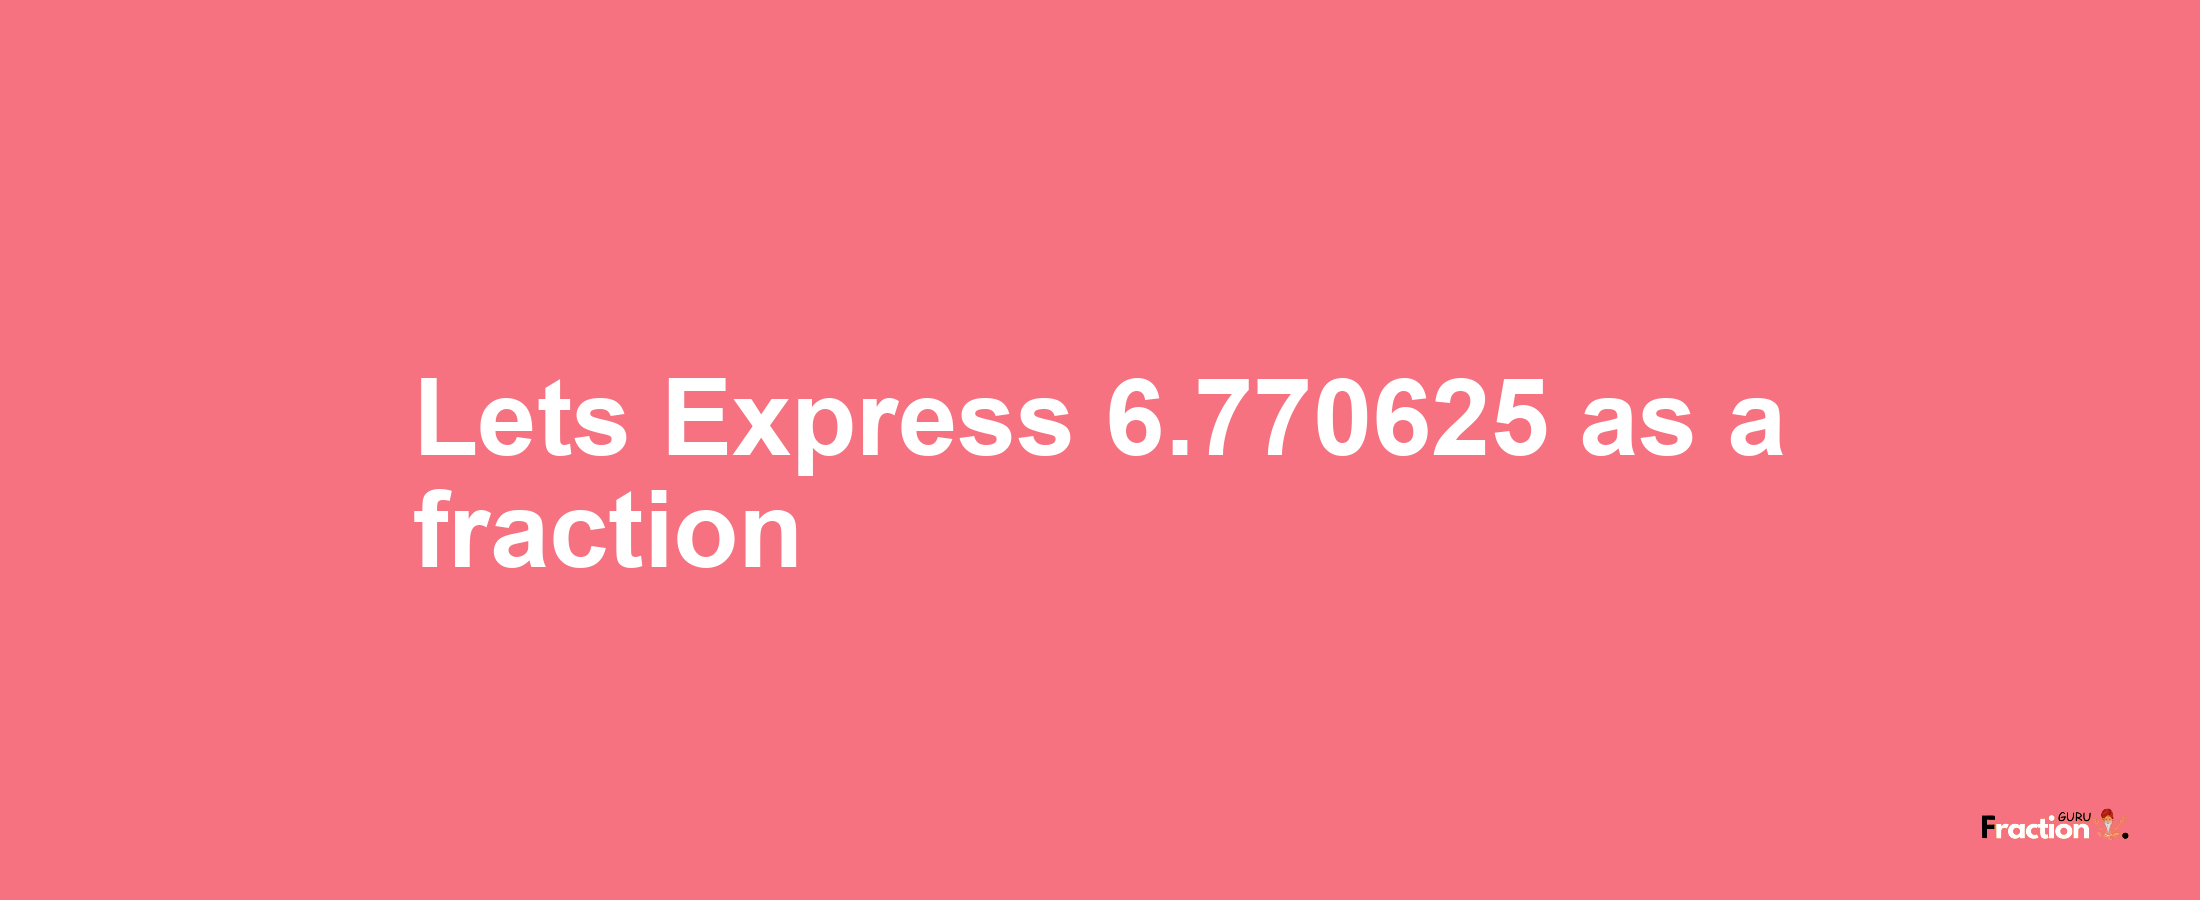 Lets Express 6.770625 as afraction